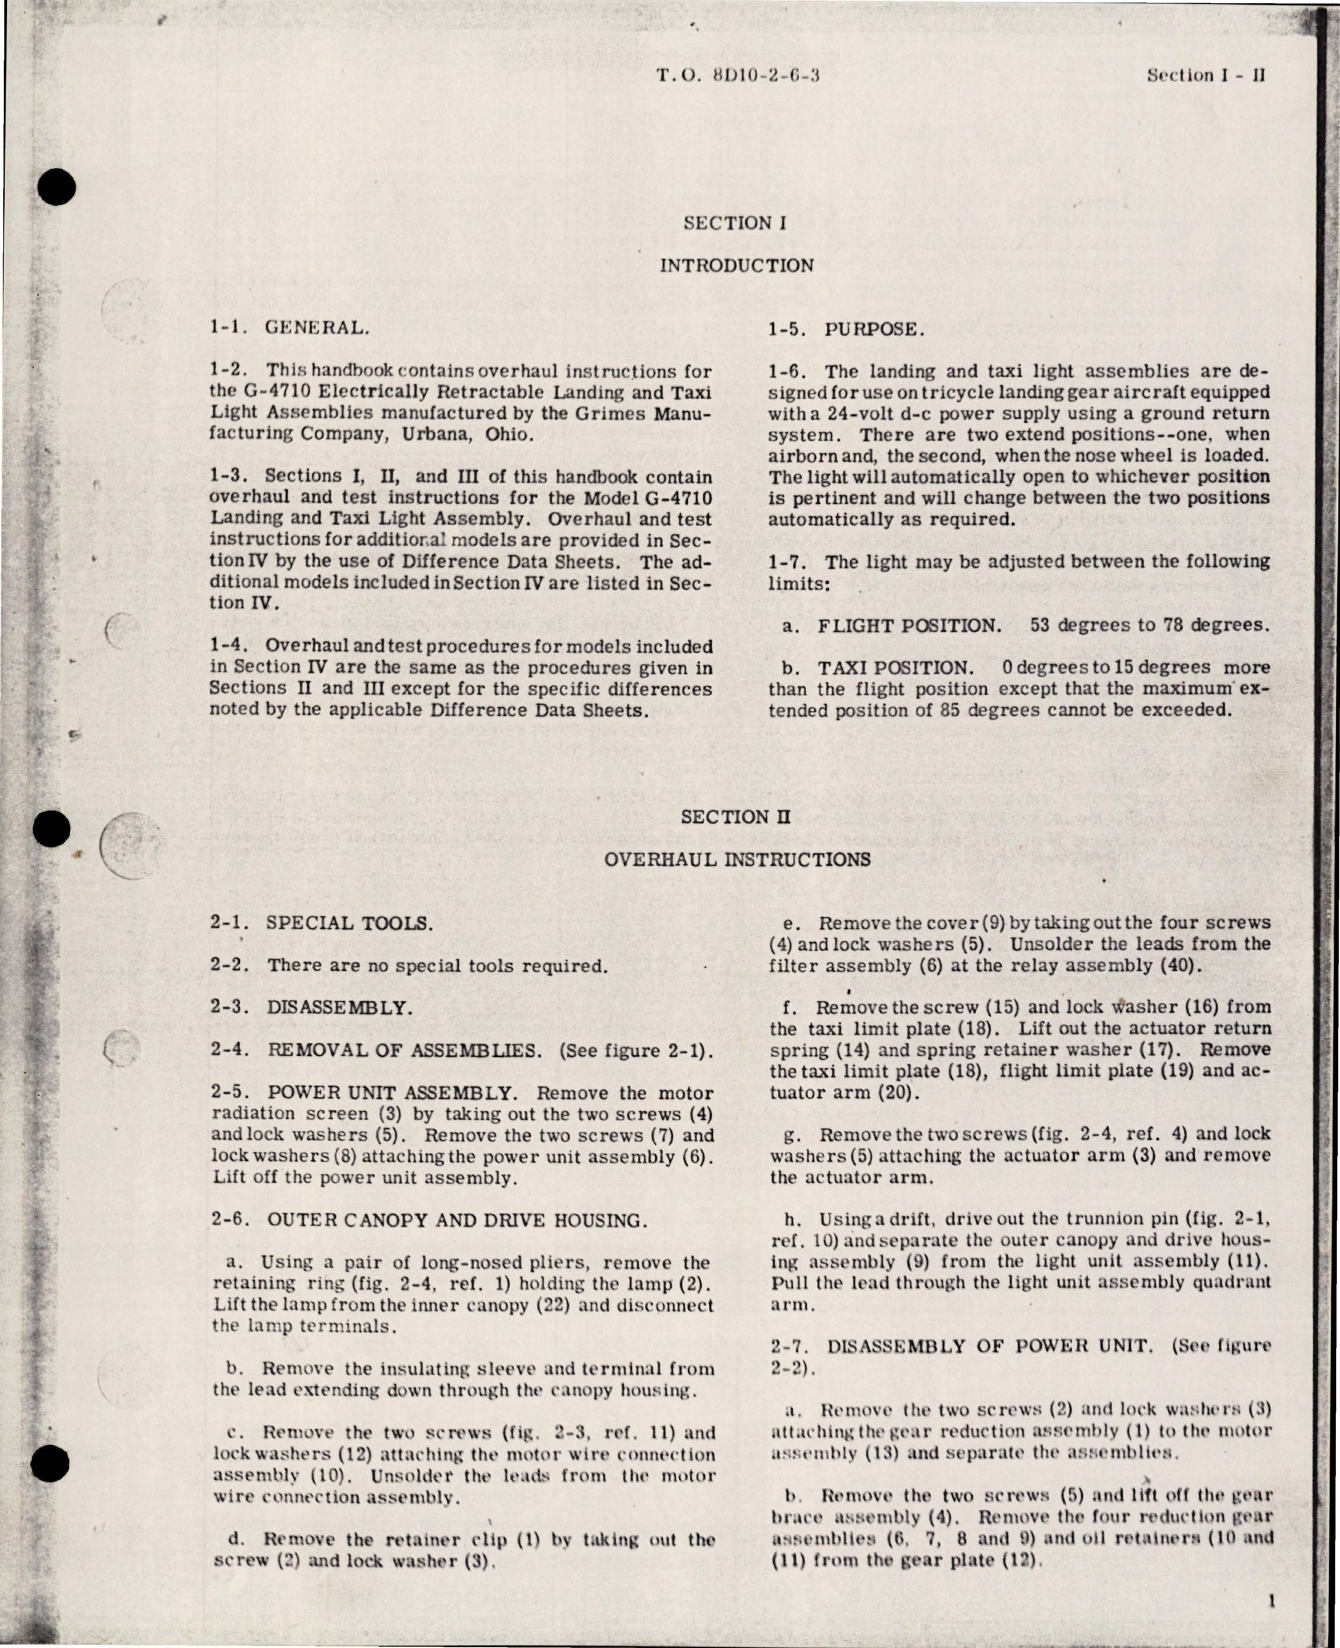 Sample page 5 from AirCorps Library document: Overhaul Instructions for Landing and Taxi Light Assemblies 